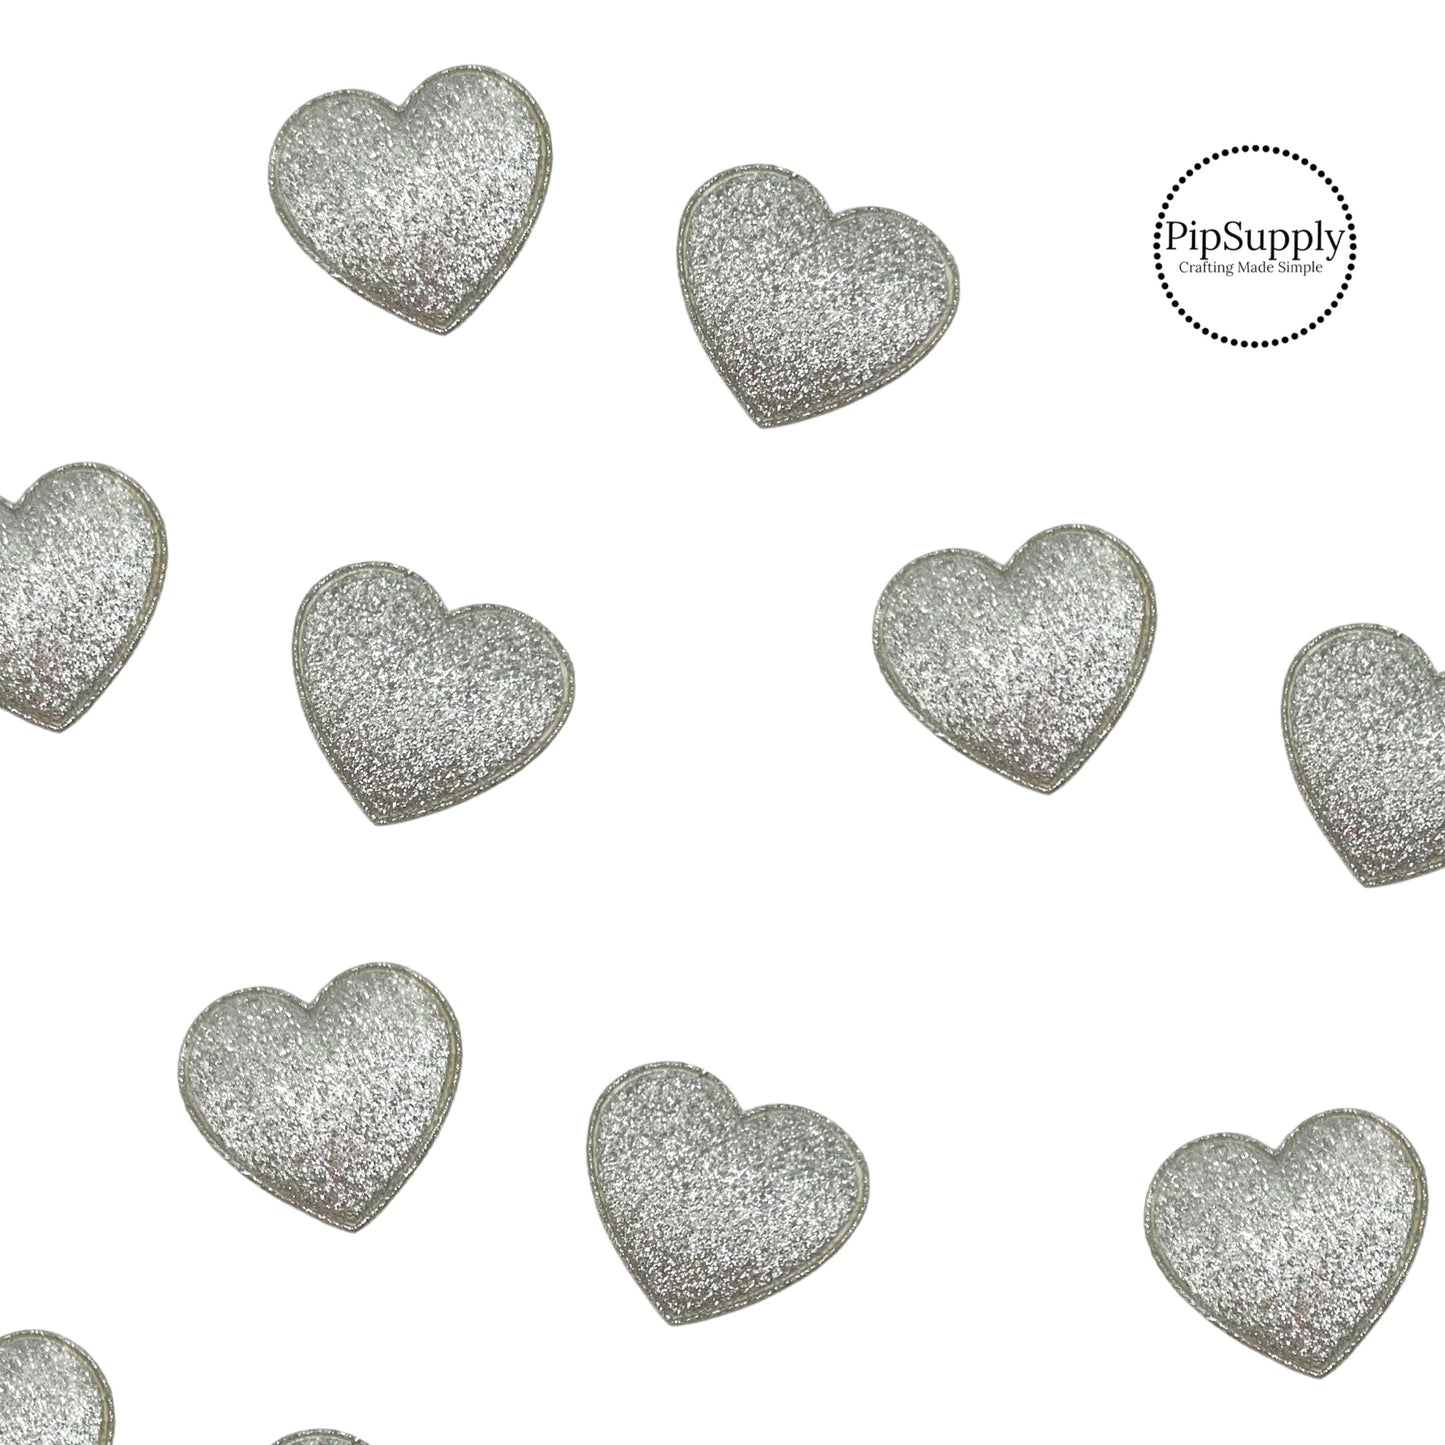 padded silver glitter hearts with soft backing and a little over an inch wide for valentine crafts